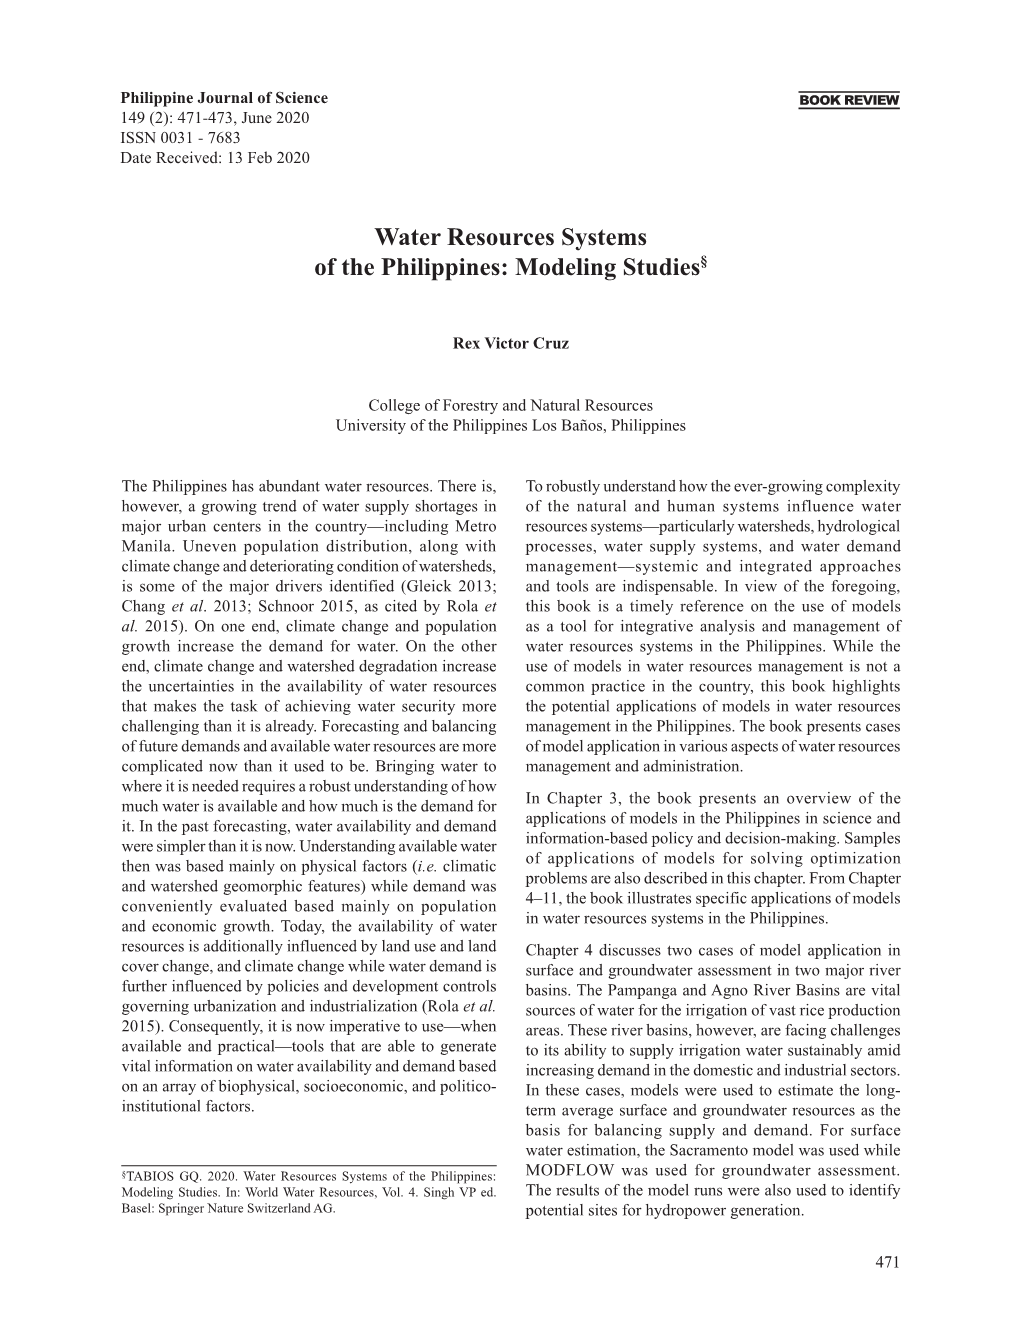 Water Resources Systems of the Philippines: Modeling Studies§